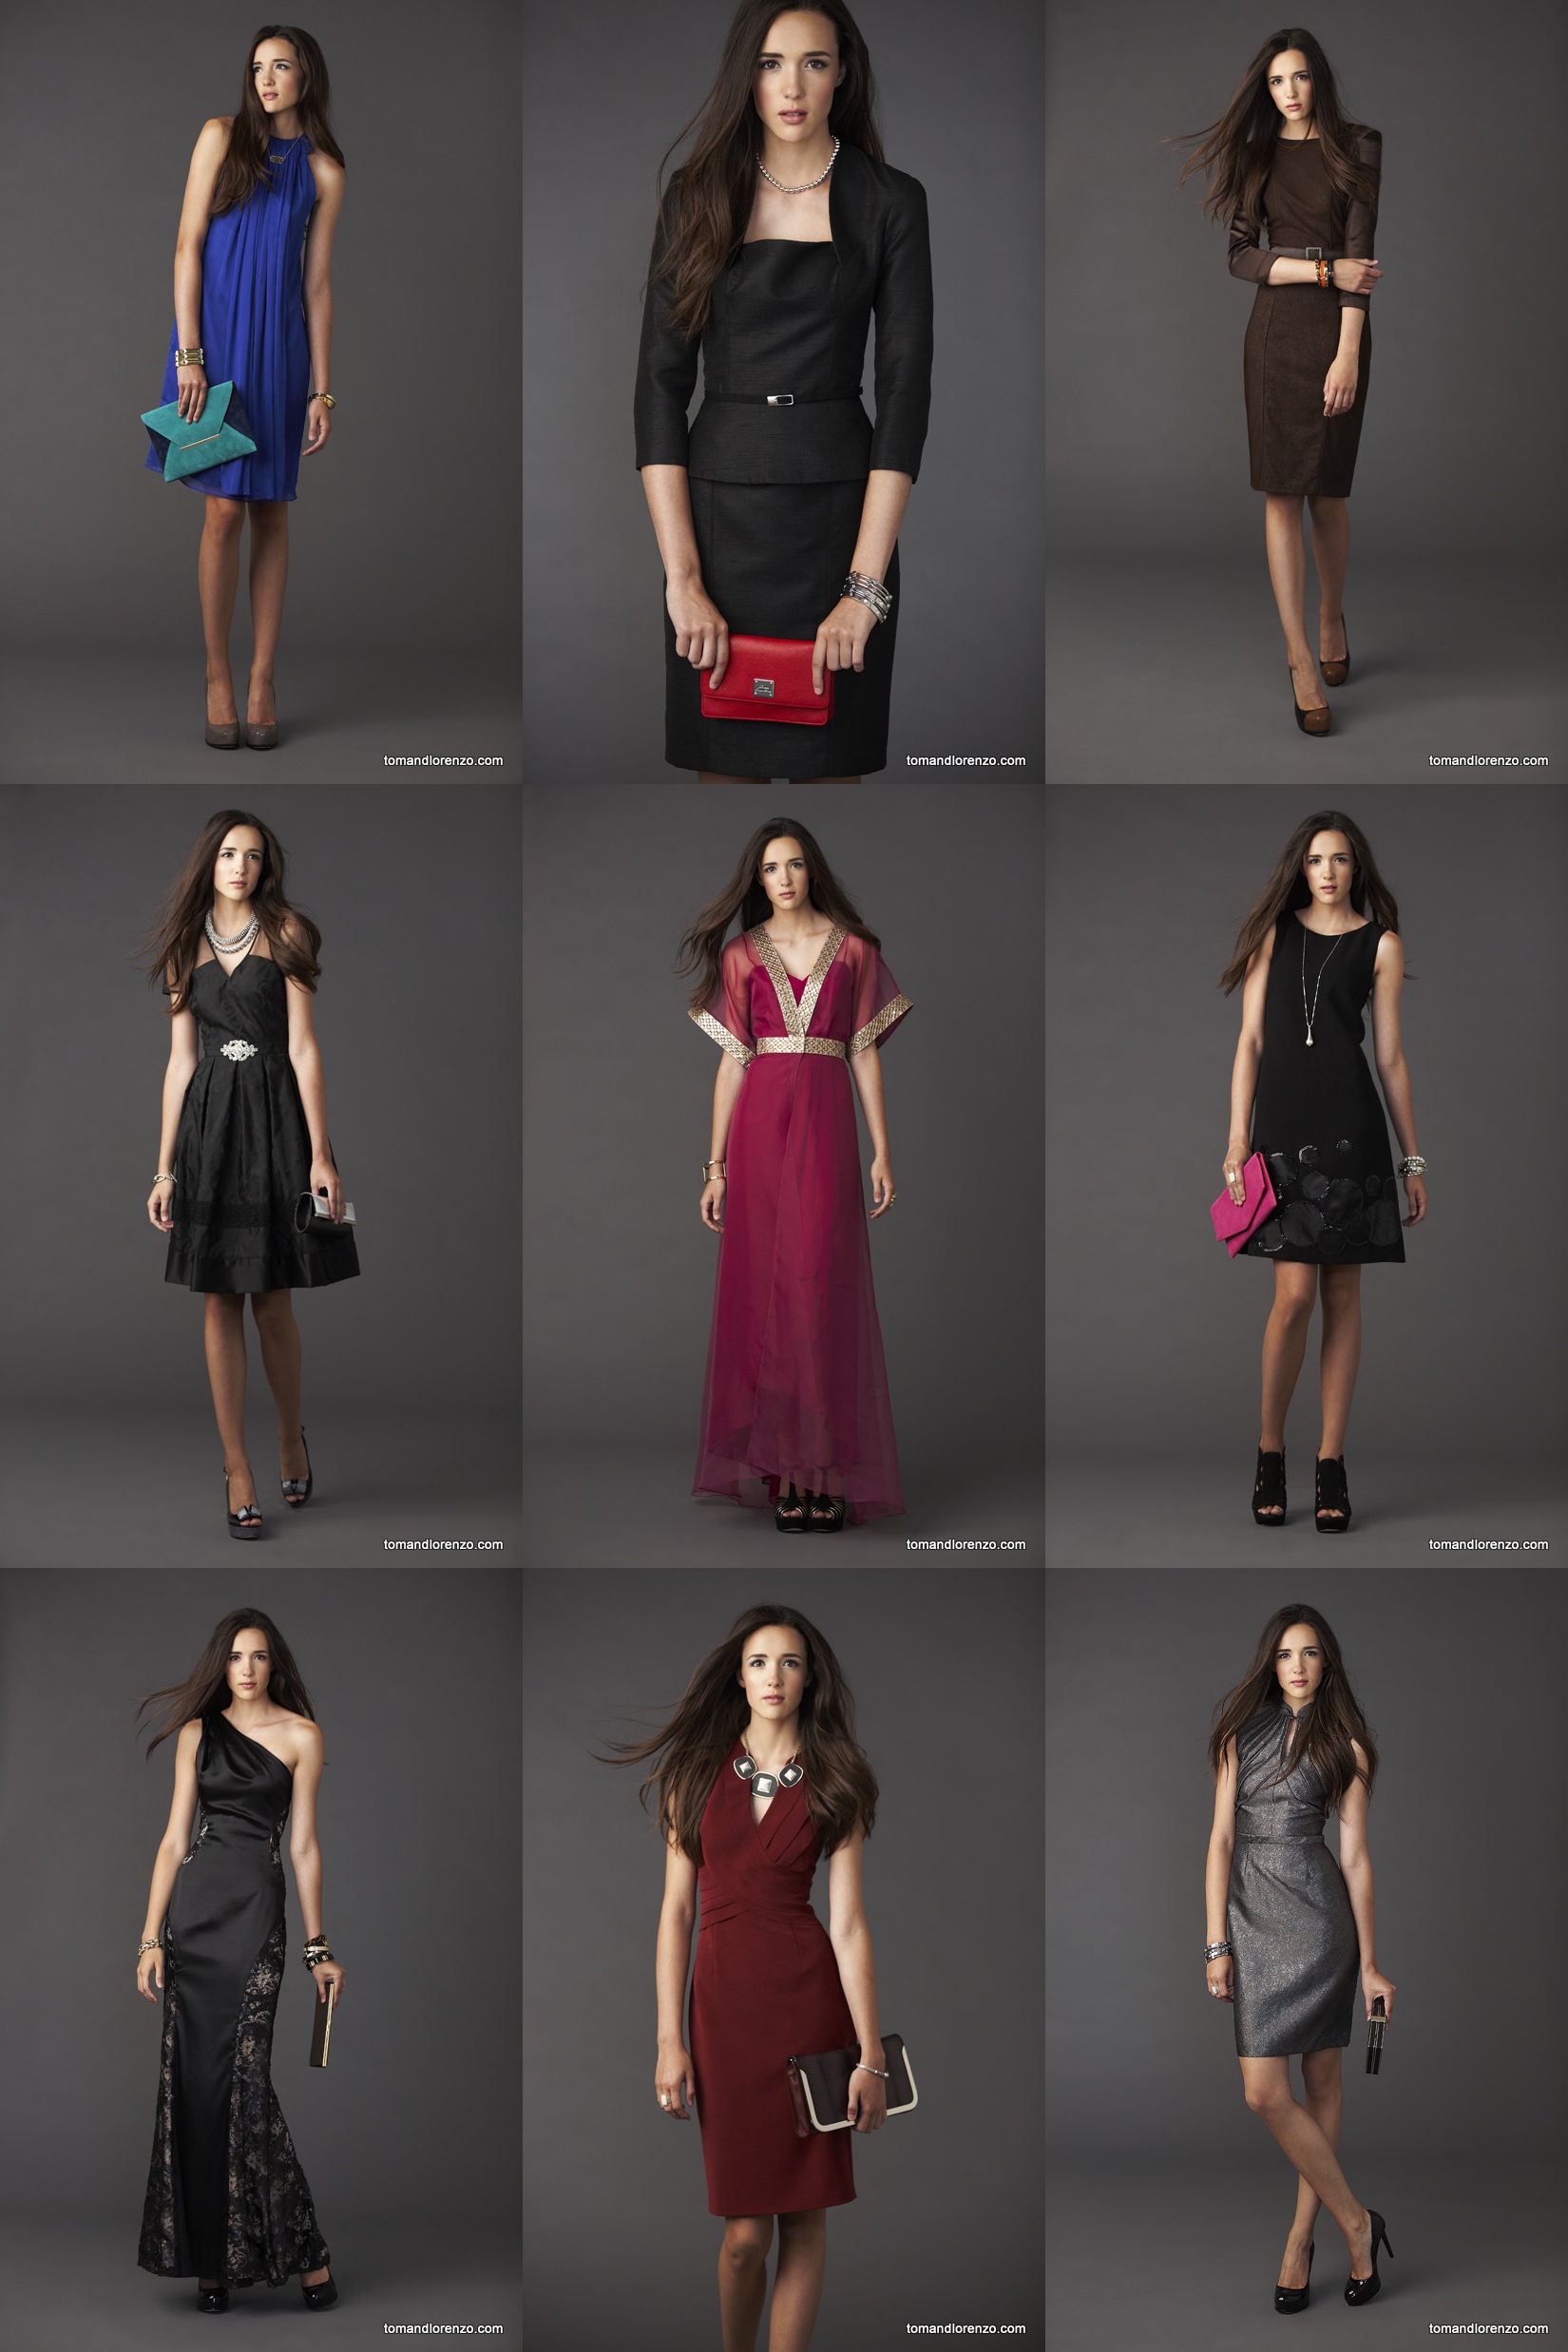 lord and taylor project runway collection